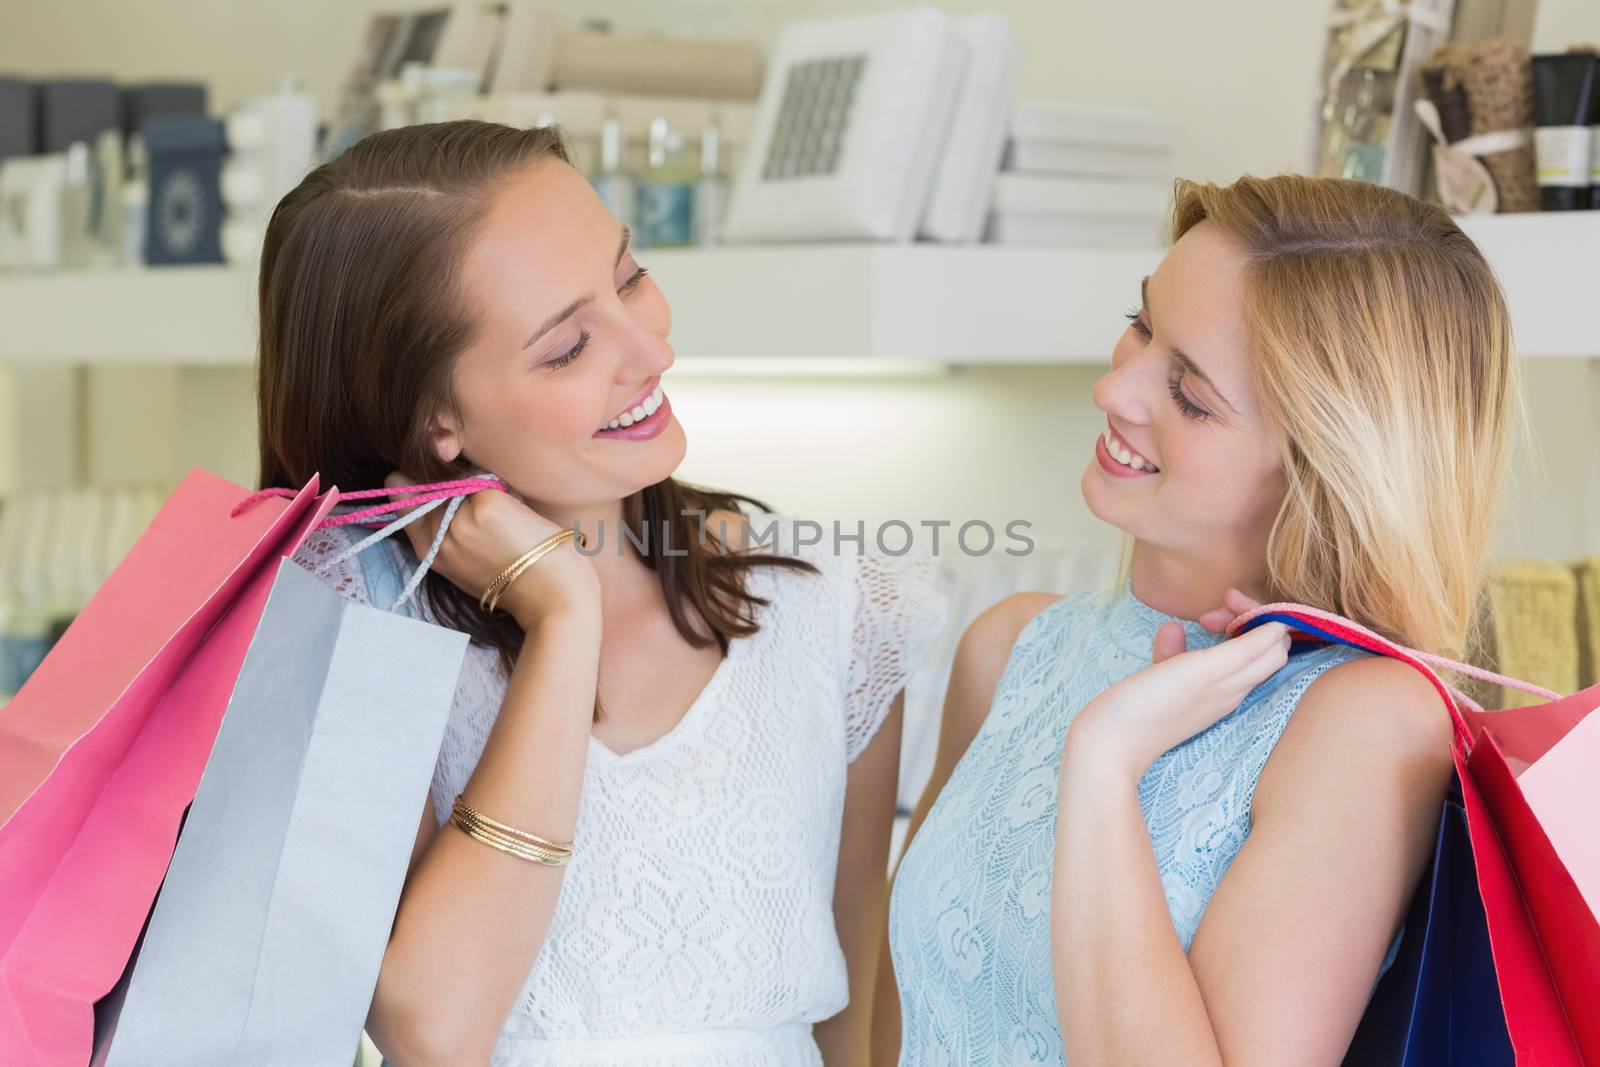 Happy women looking at each other with shopping bags in a beauty salon